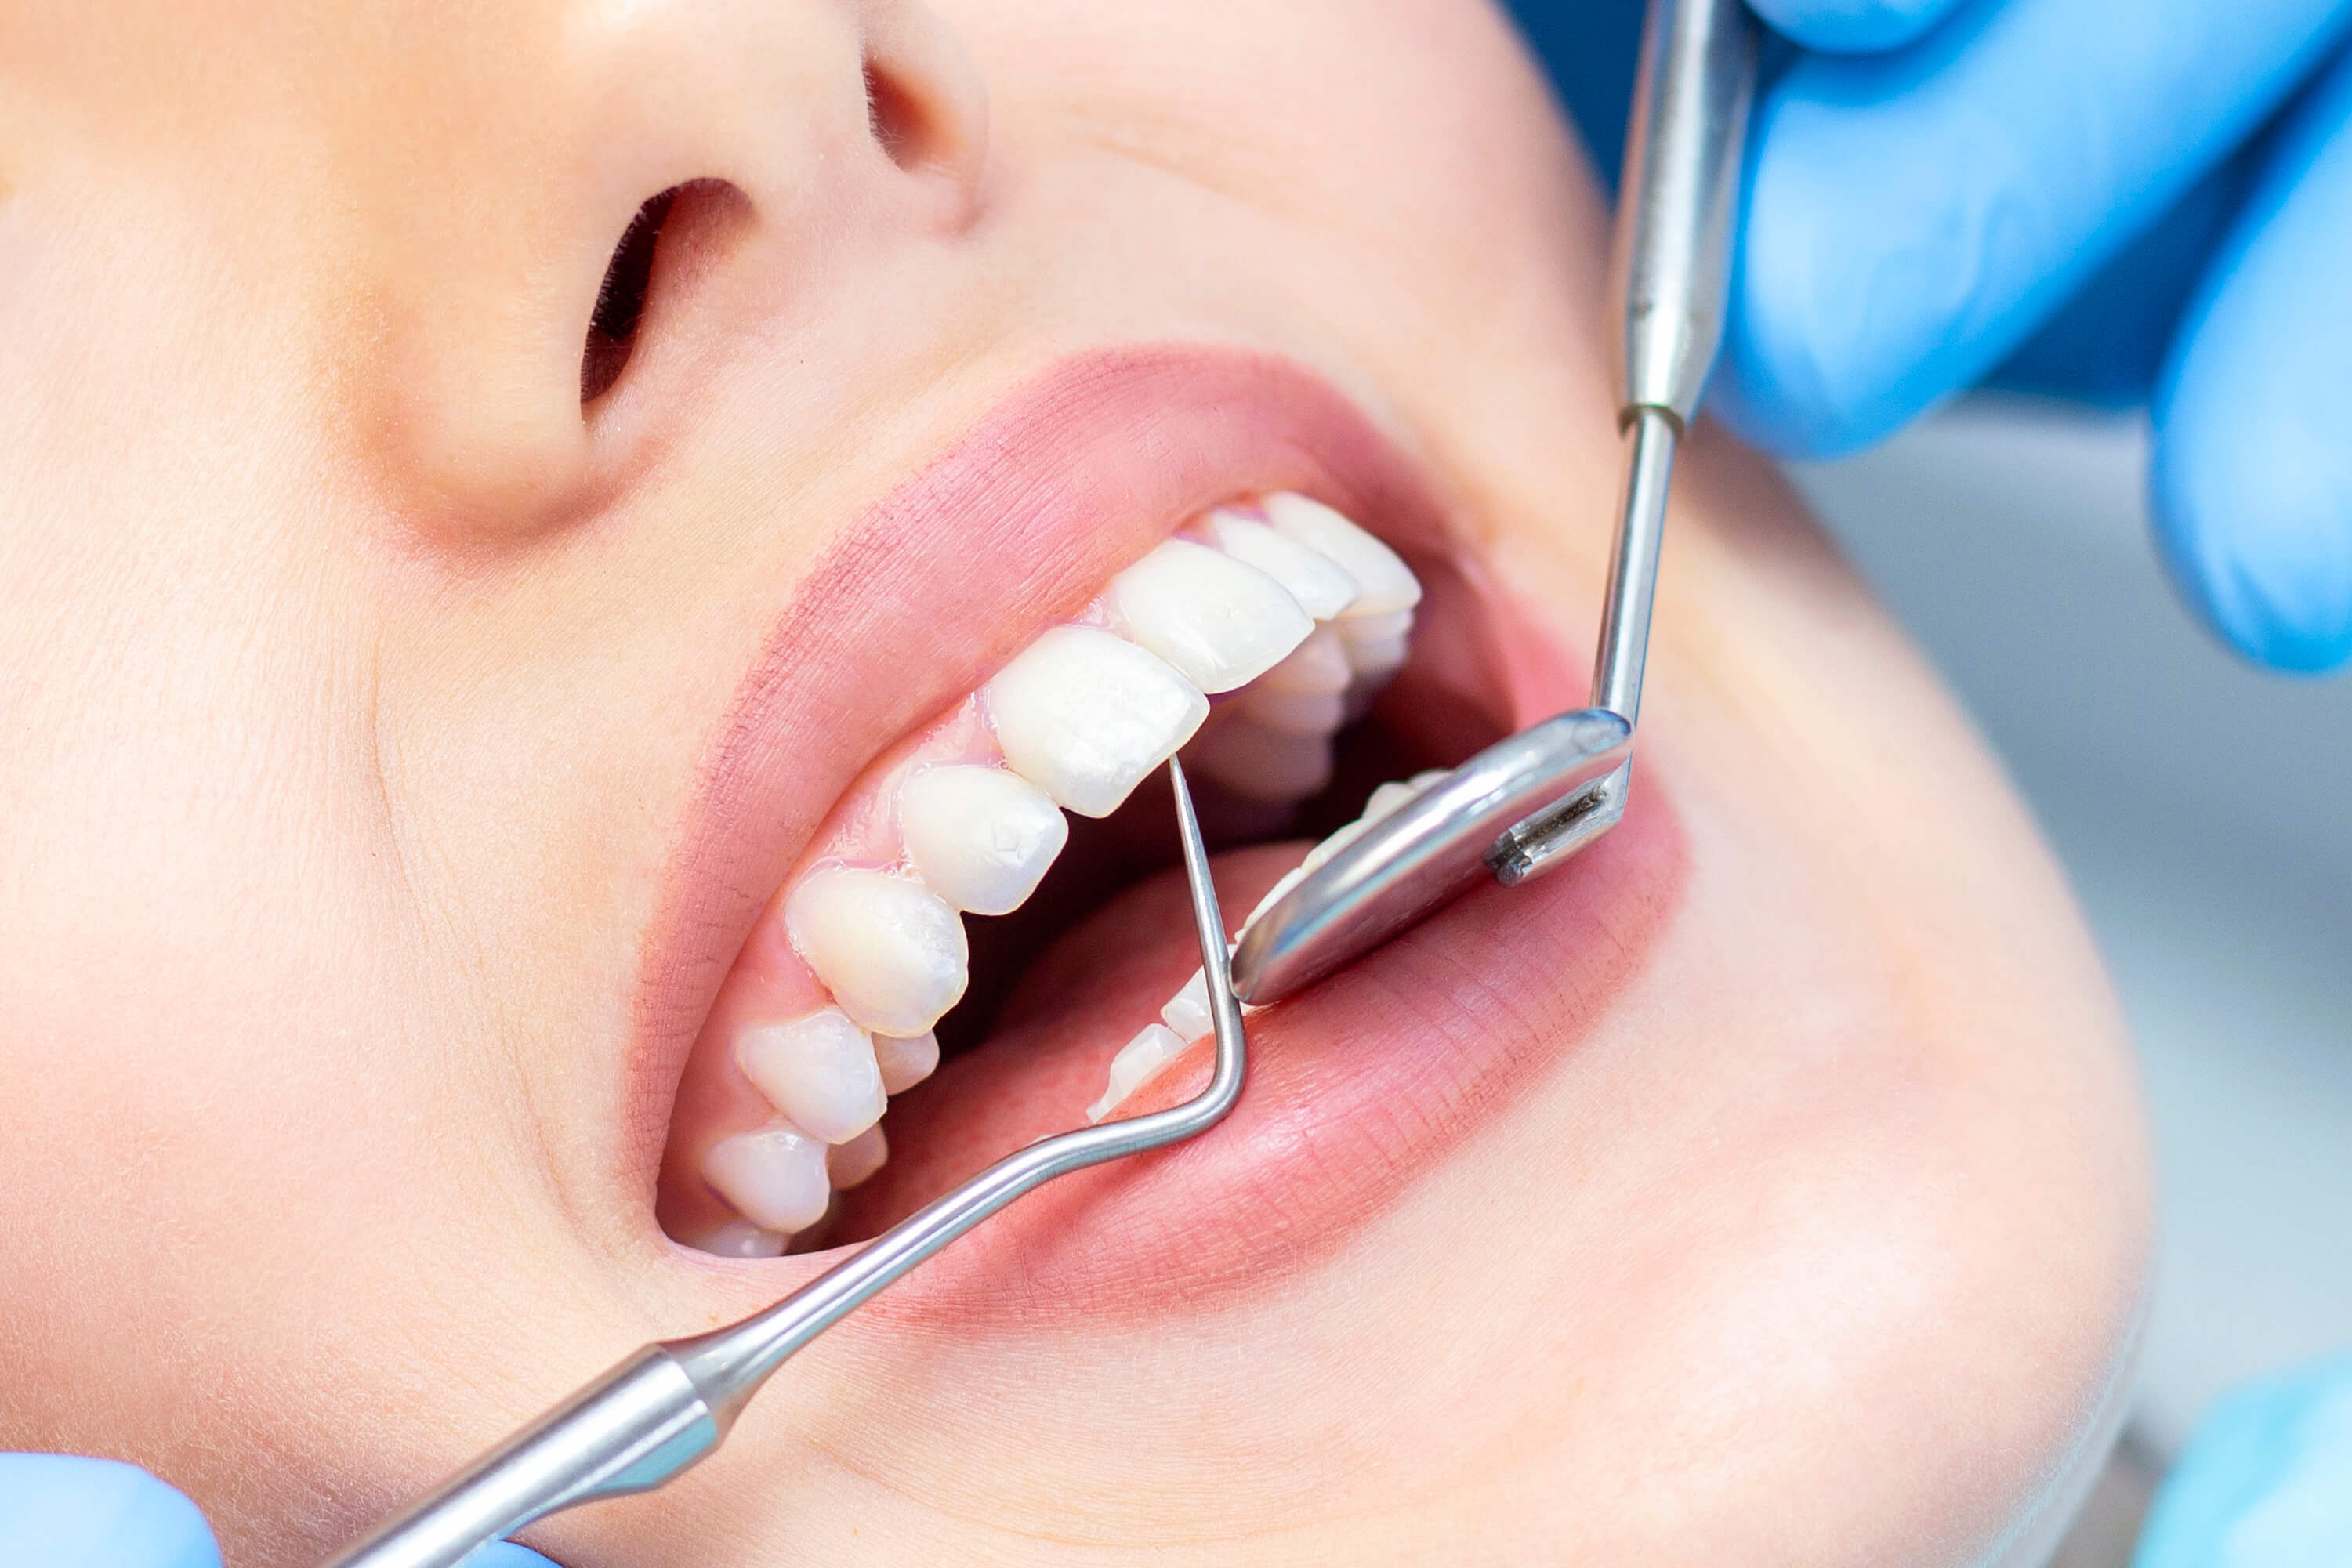 Extracting Children's Teeth Safely Without Pain in Bali